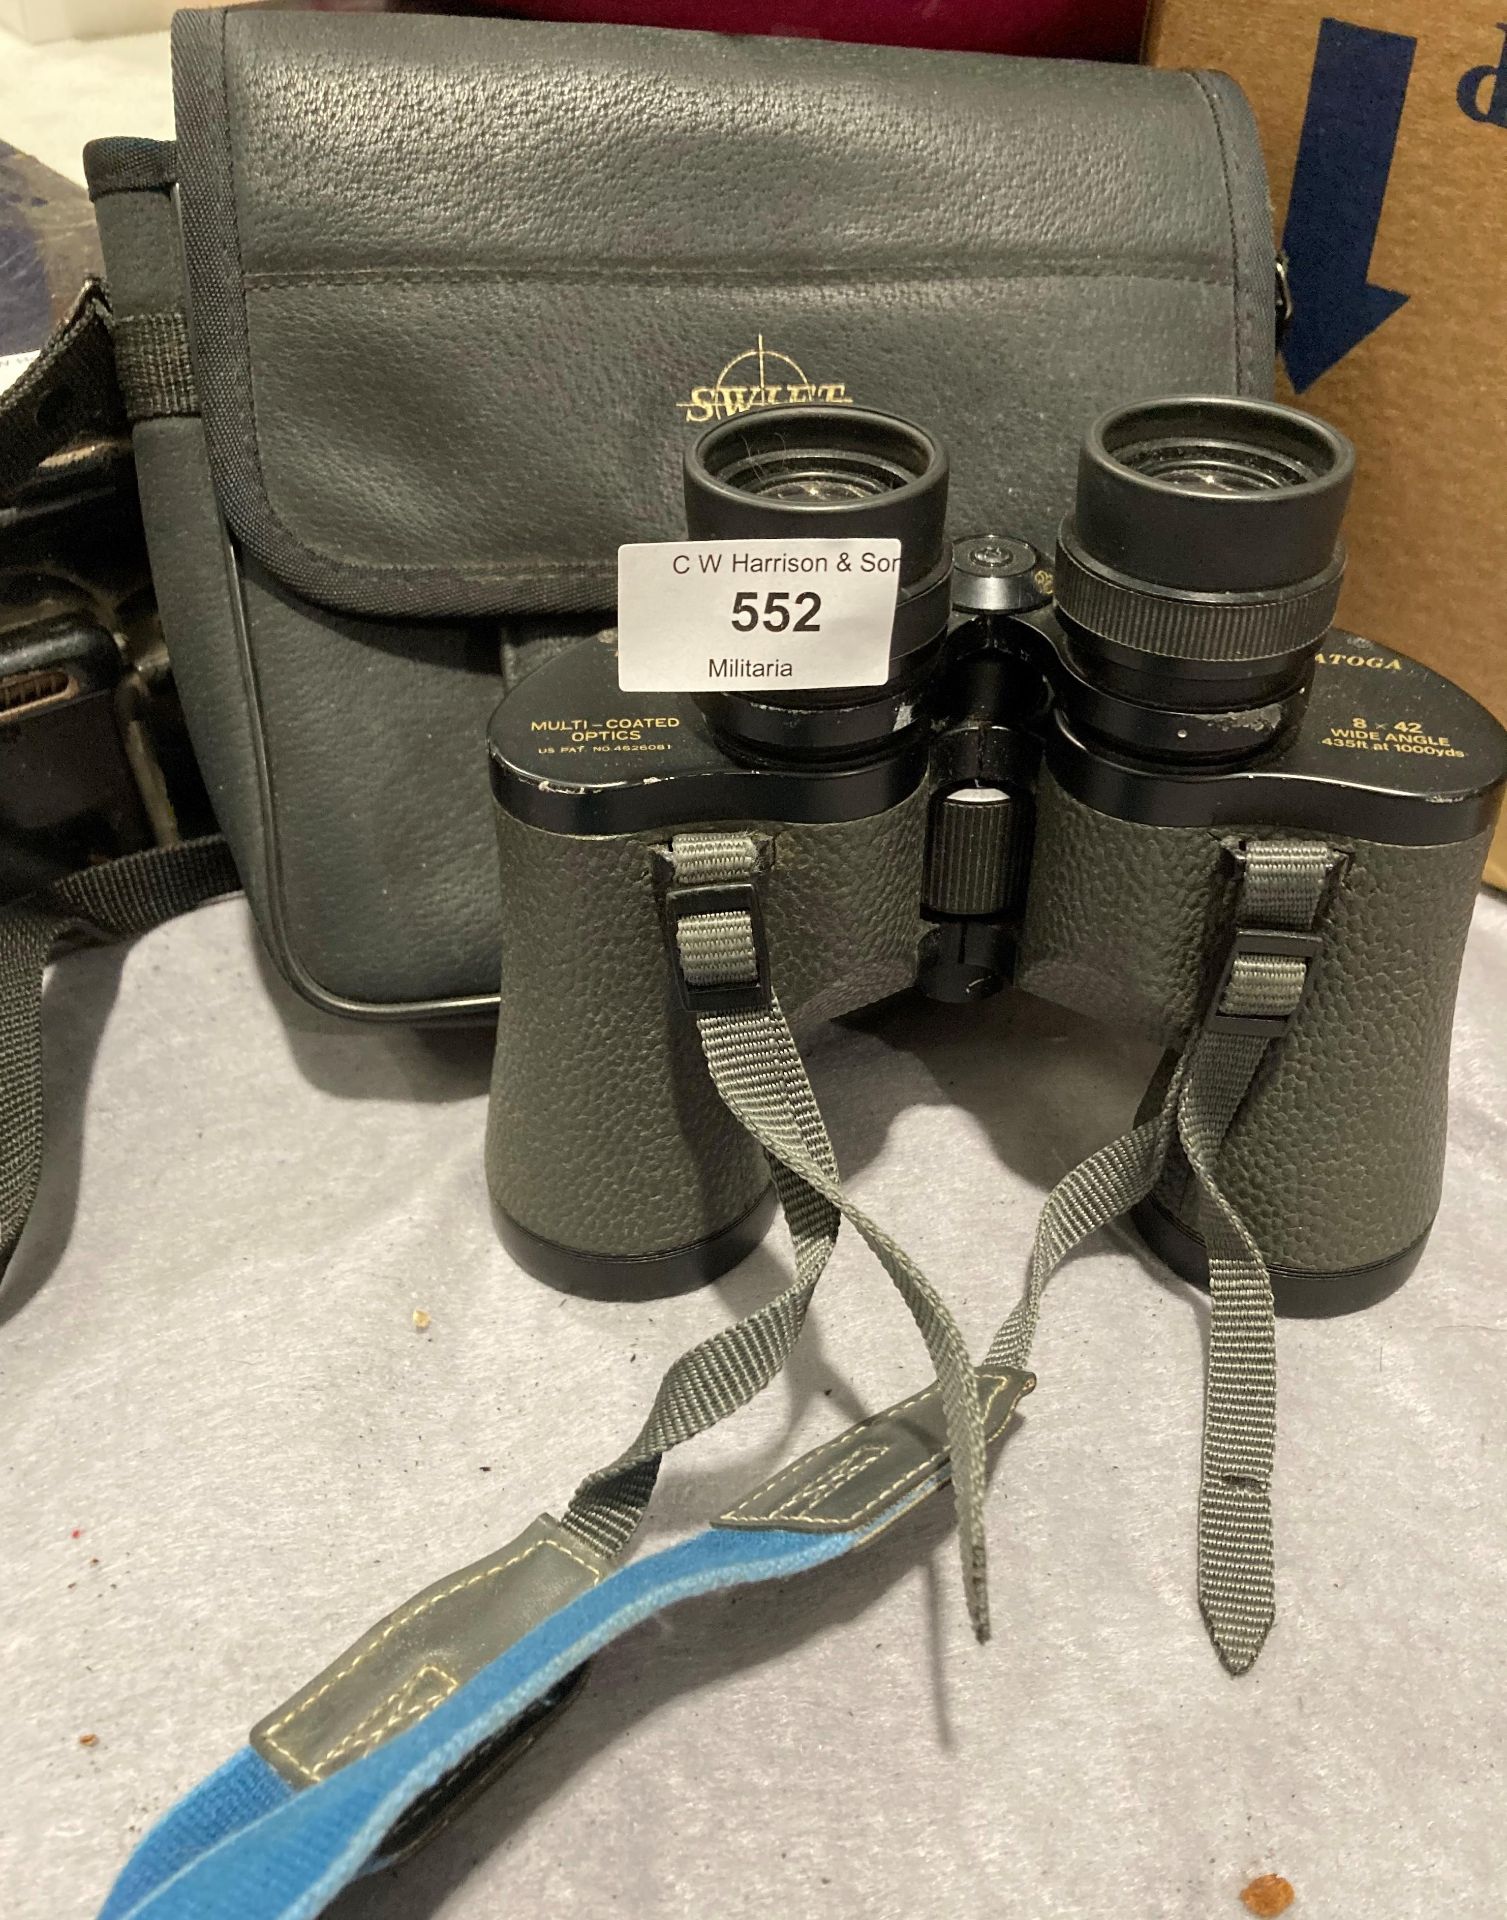 Pair of Swift Saratoga 8x42 wide angle binoculars in bag (Saleroom location: S2 centre tables)